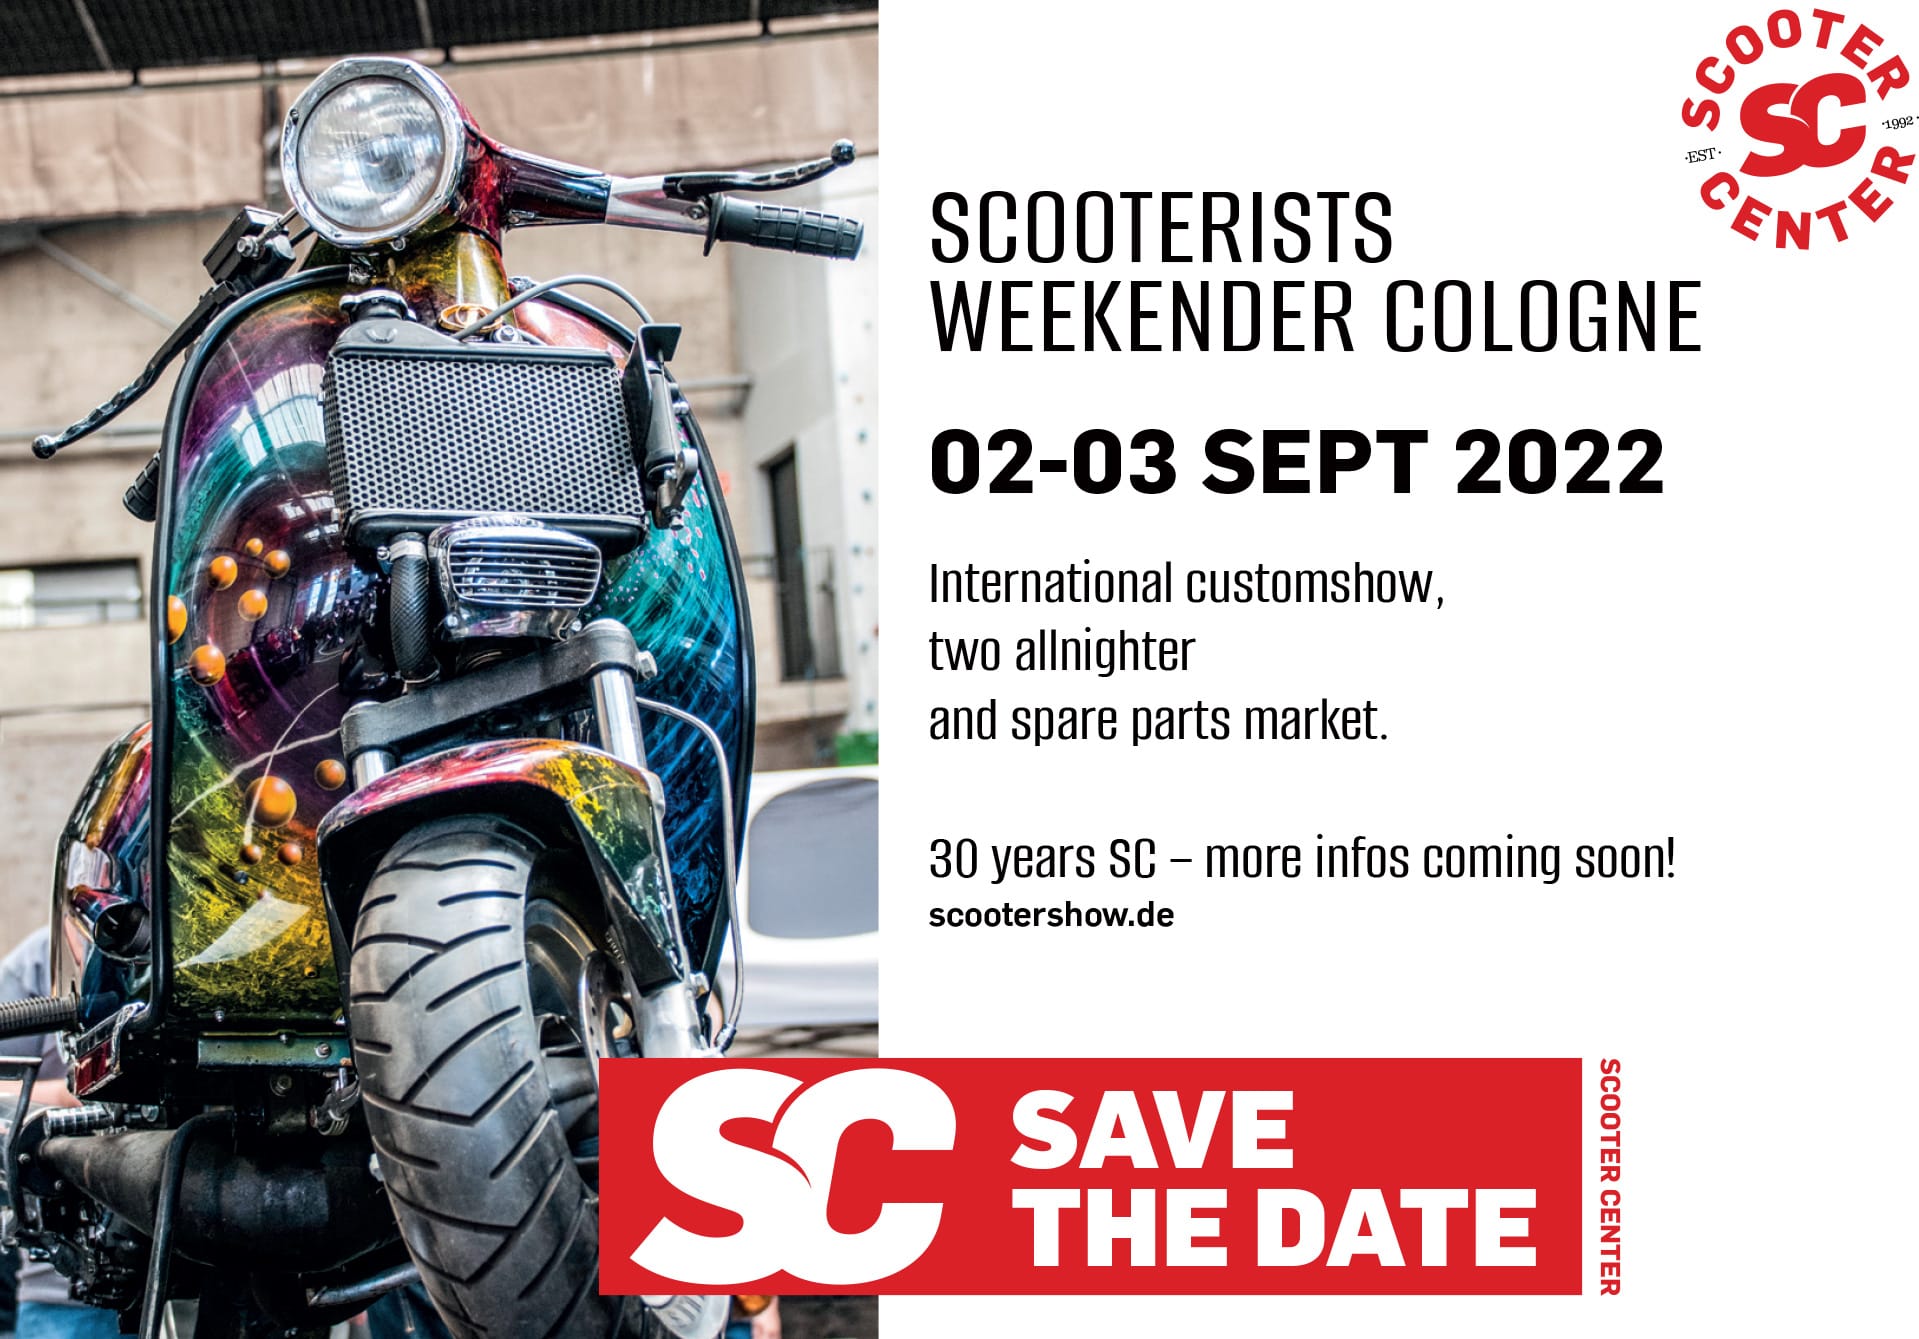 Scooterists Weekender Cologne 2022